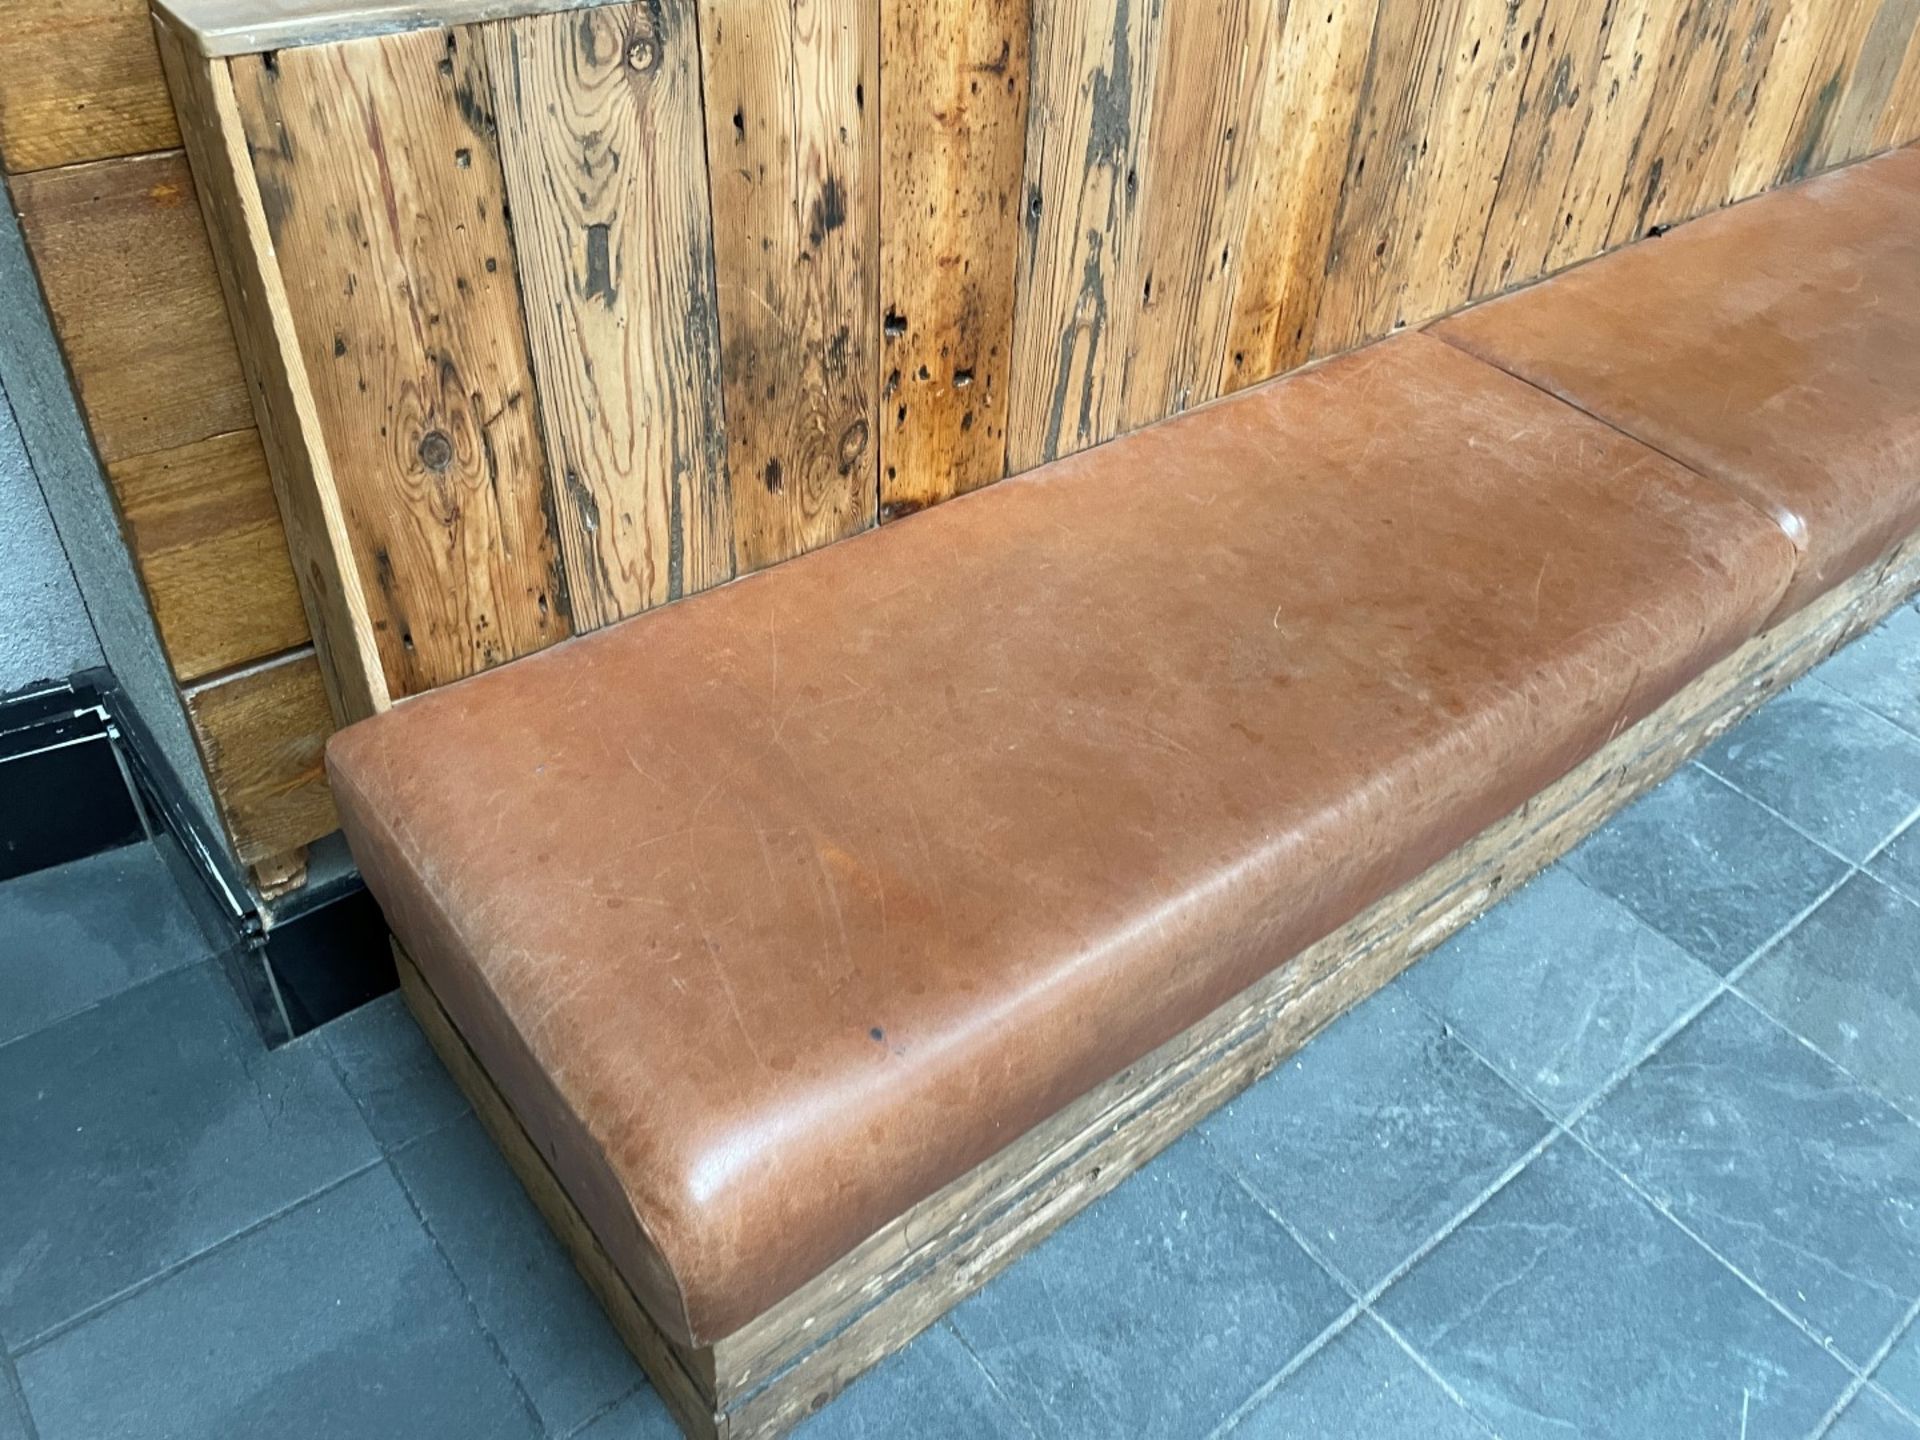 1 x Rustic Wooden Seating Bench Featuring Tan Leather Seat Pads - Suitable For Restaurants or Bars! - Image 11 of 12